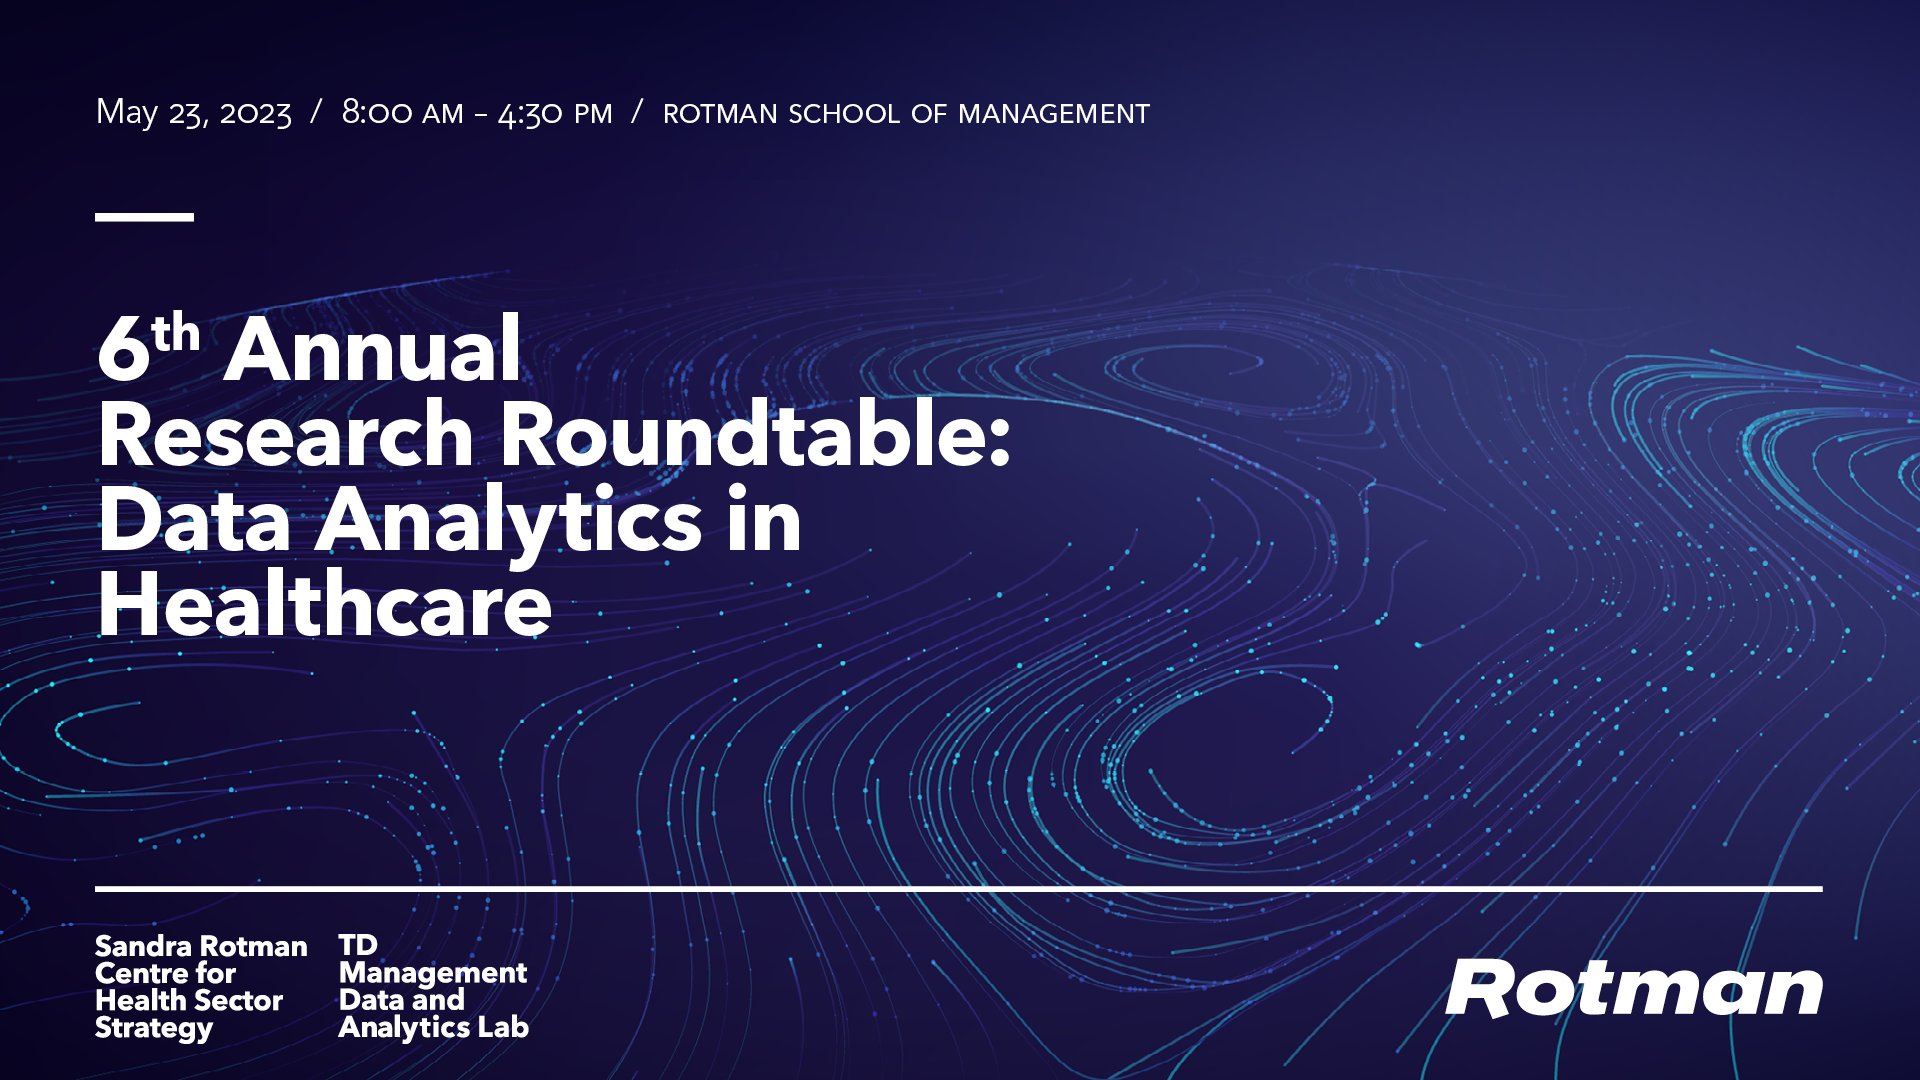 event image for the 6th annual research roundtable in data analytics in healthcare